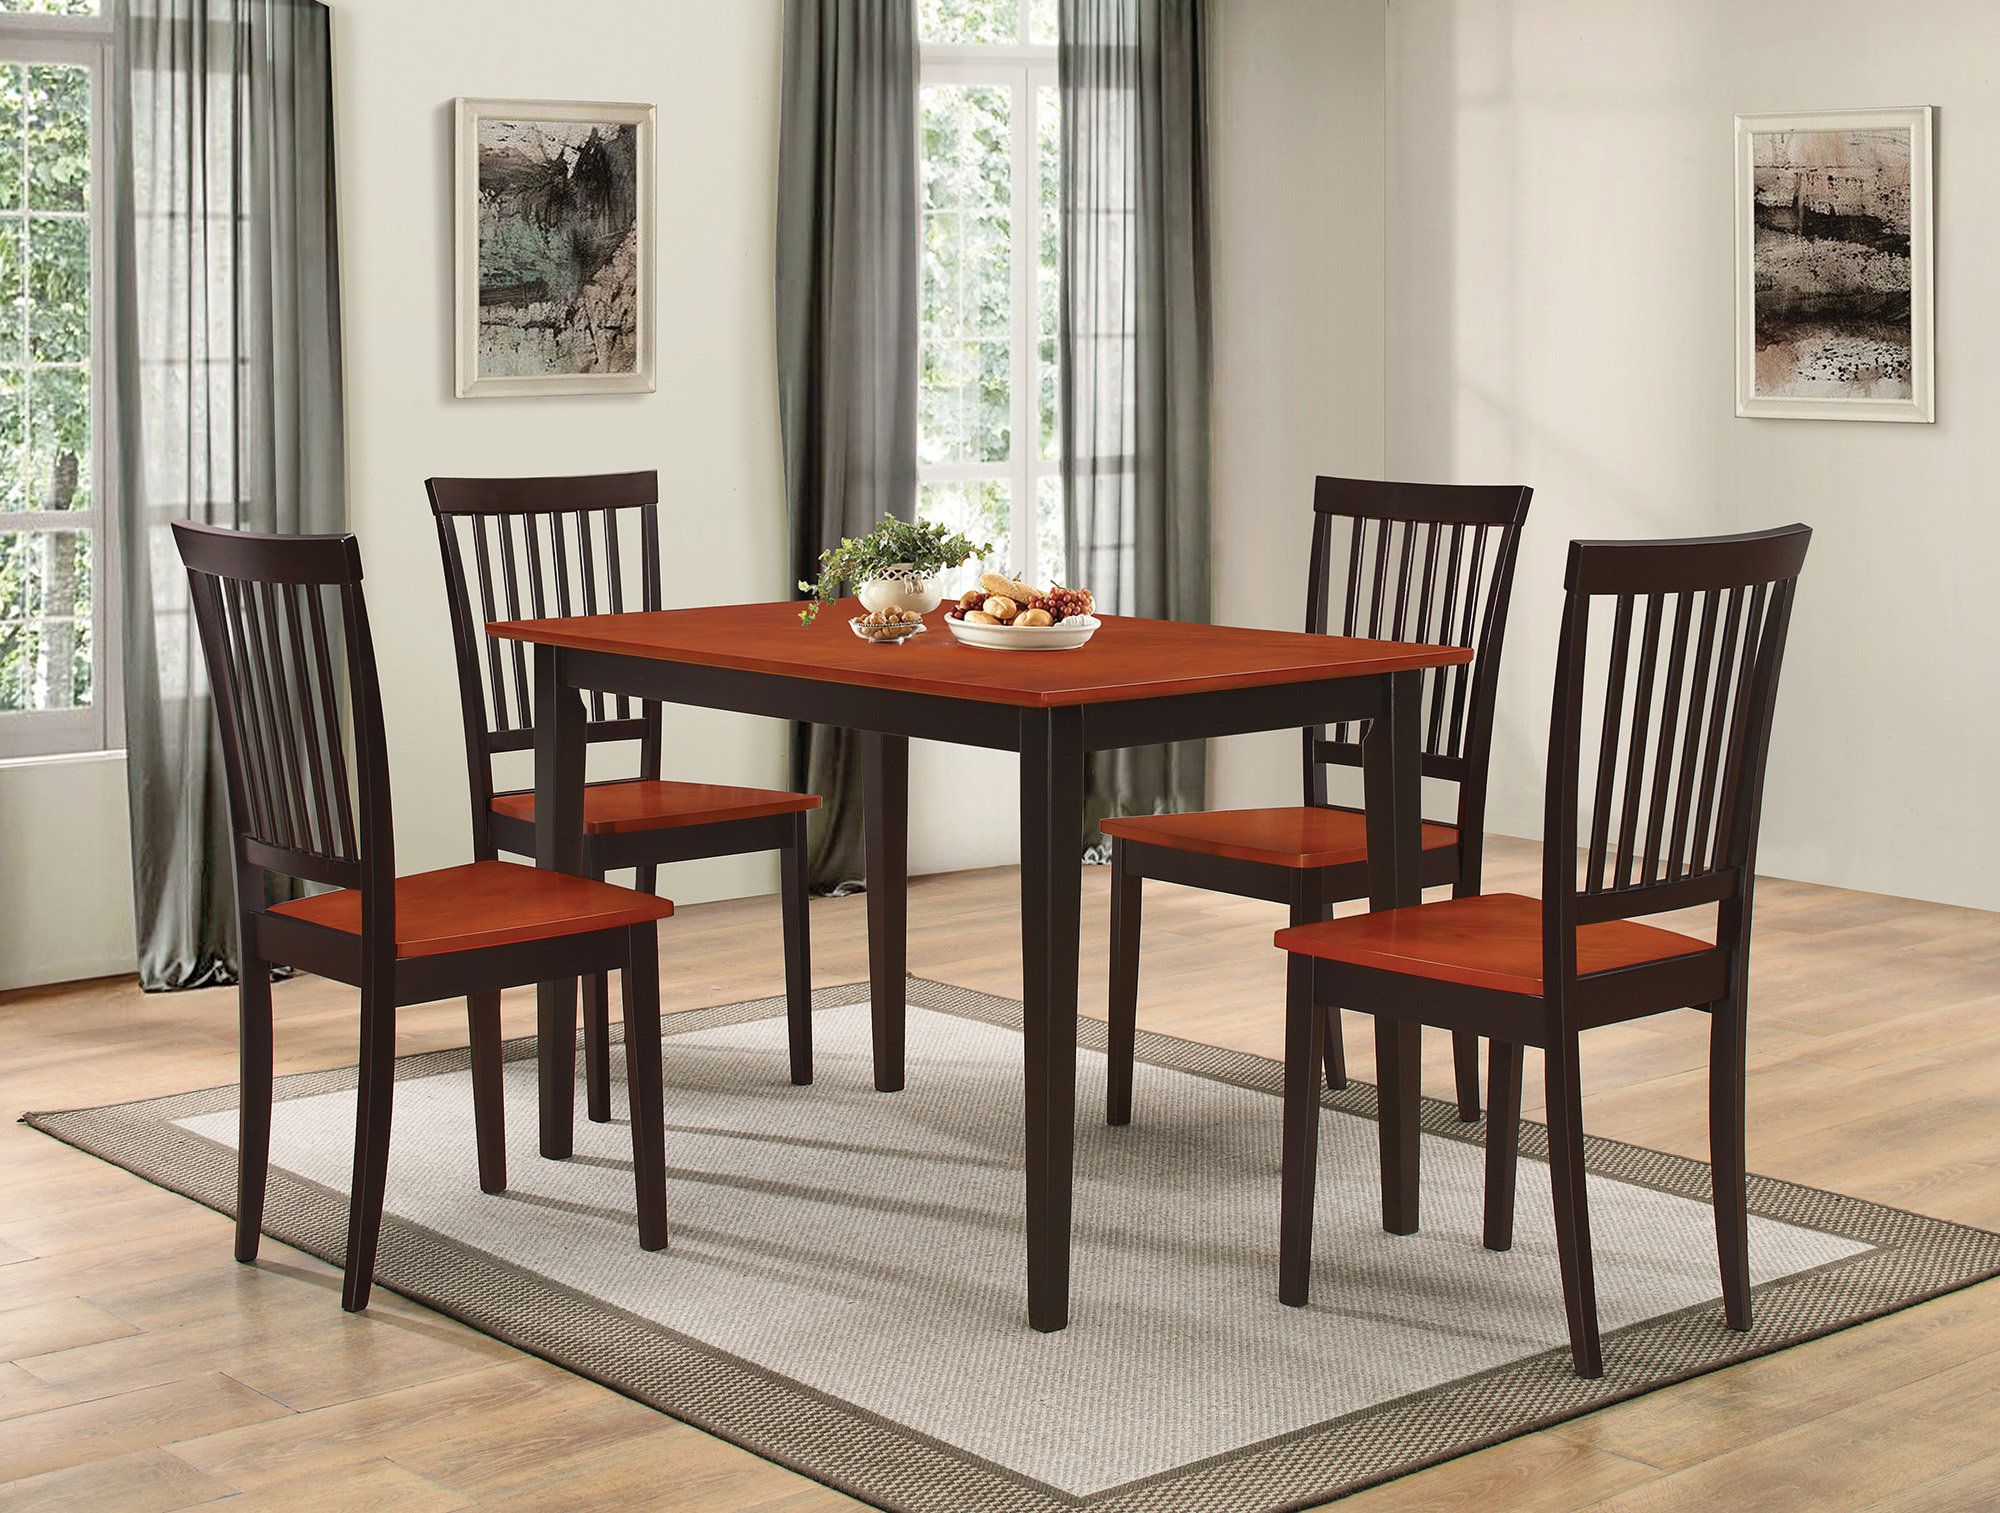 Pattonsburg 5 Piece Dining Set Throughout Most Current Pattonsburg 5 Piece Dining Sets (View 1 of 20)